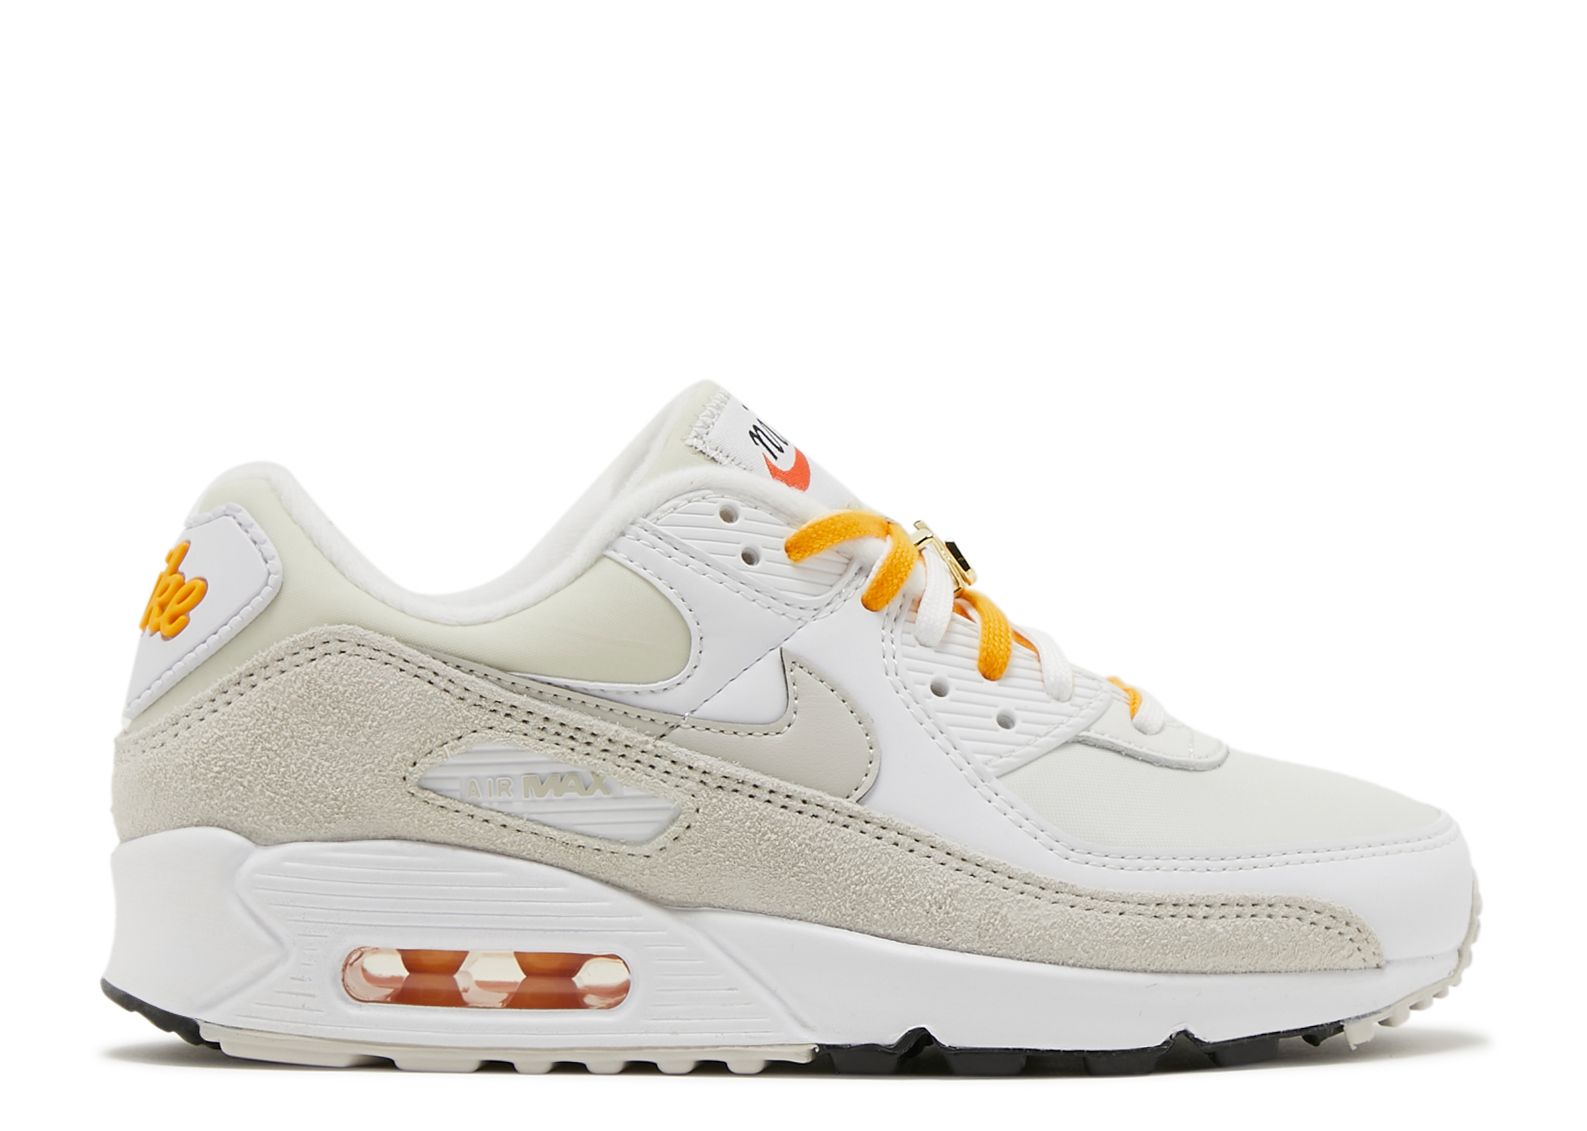 Wmns Air Max 90 SE 'First Use - White University Gold'